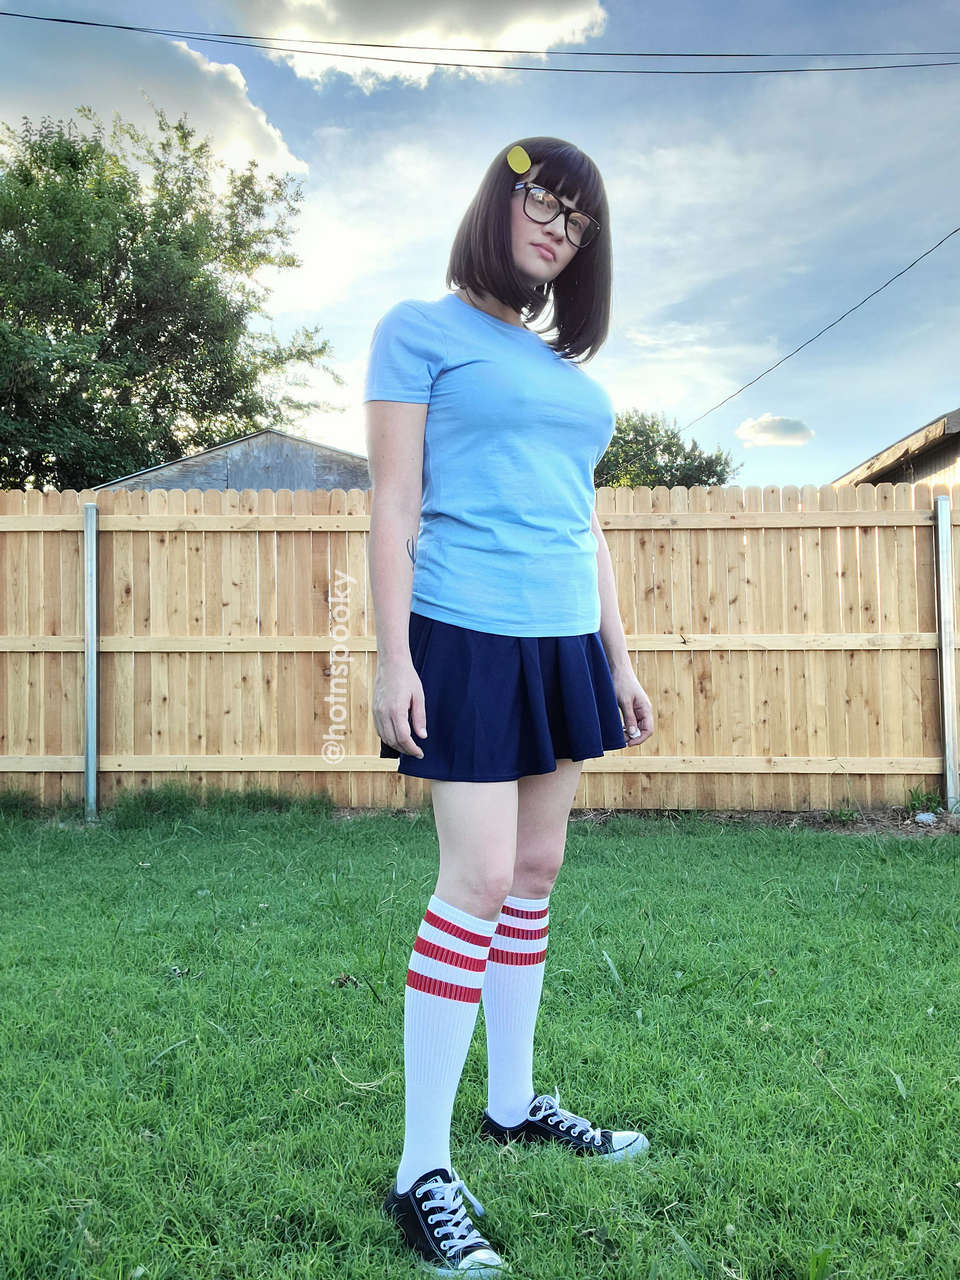 Tina Belcher From Bobs Burgers By Sophie Moo